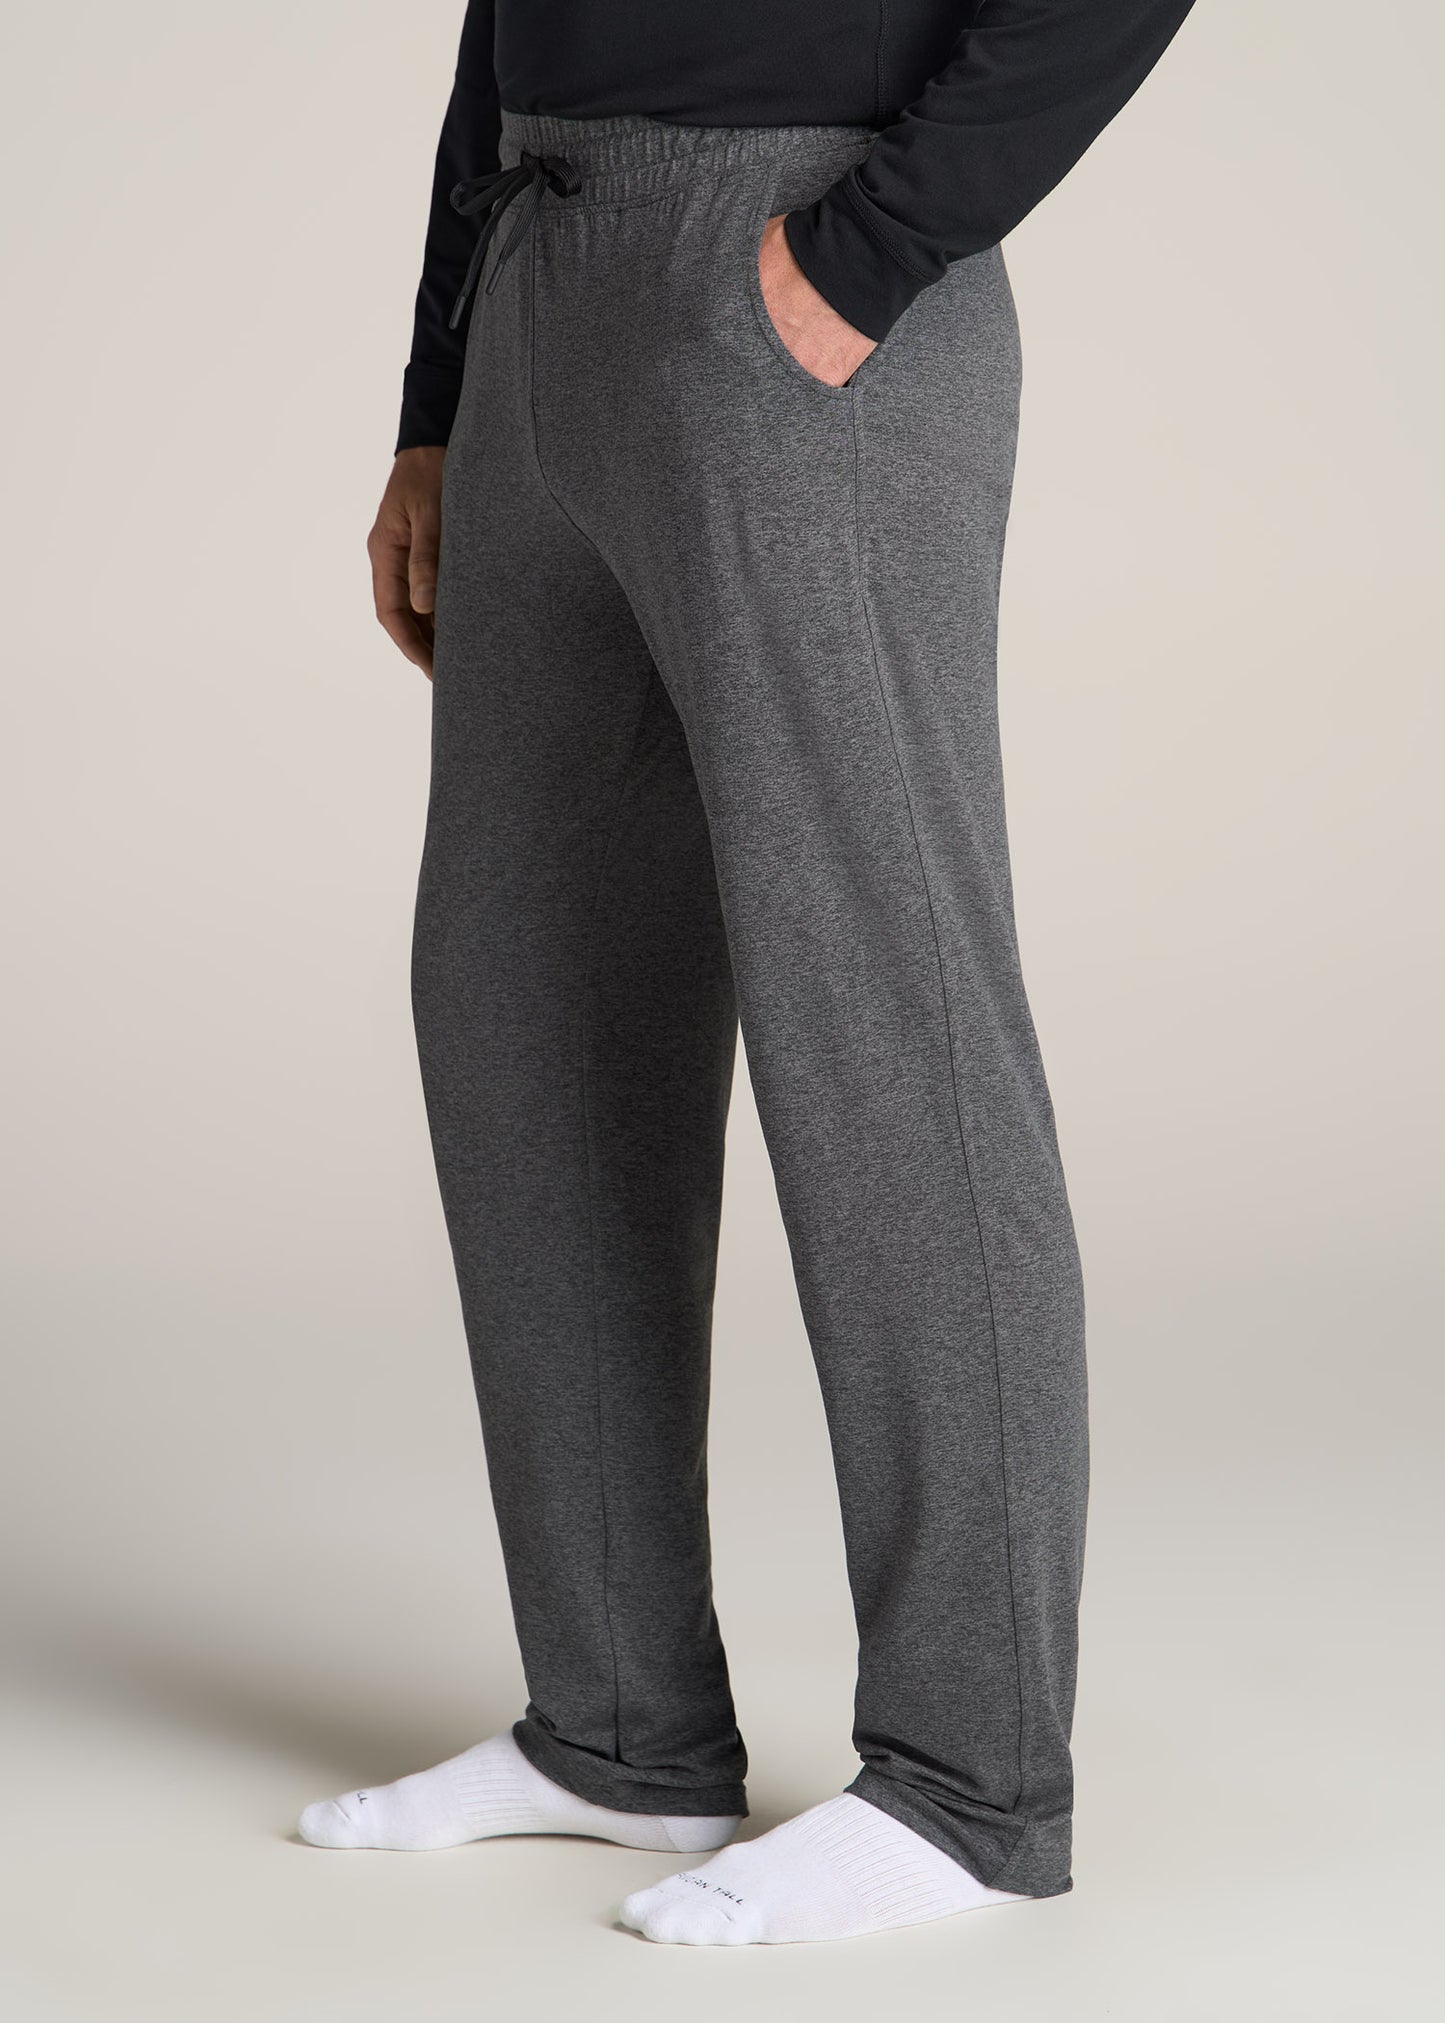 American-Tall-Men-Weekender-Stretch-Lounge-Pant-Charcoal-Mix-side